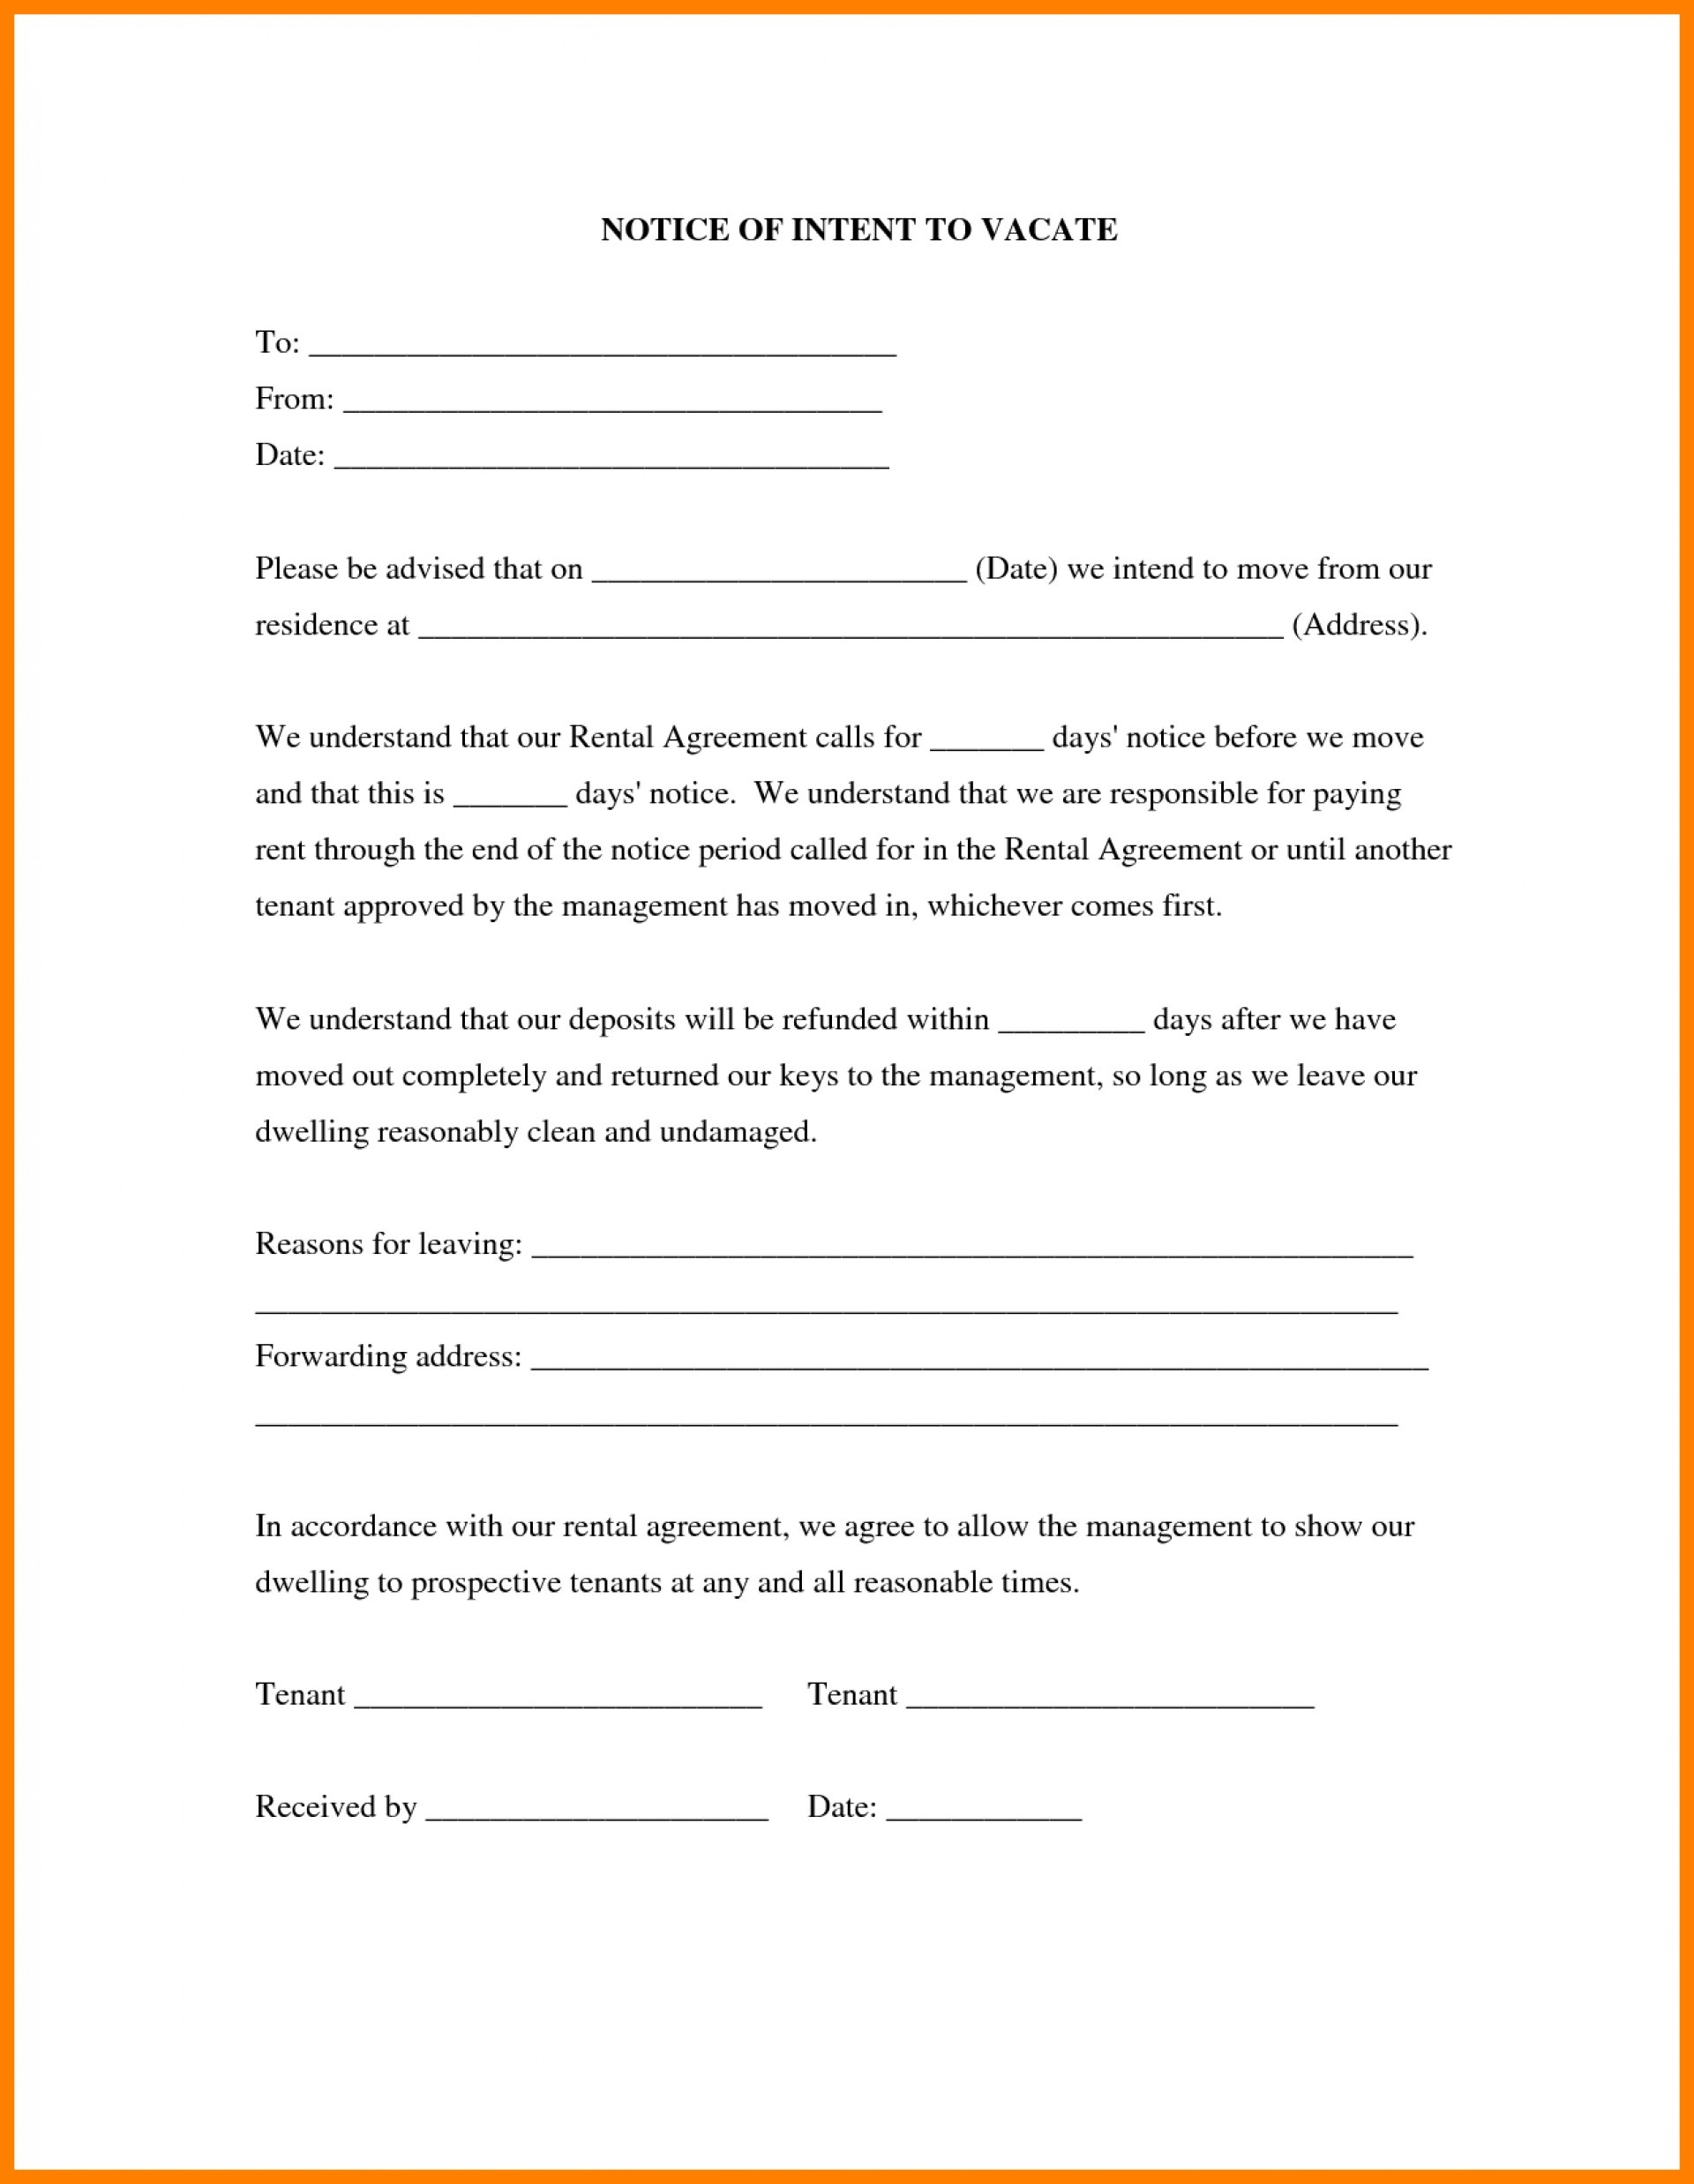 008 Free Printable Eviction Notice Forms Form Day To Vacate Sample - Free Printable Eviction Notice